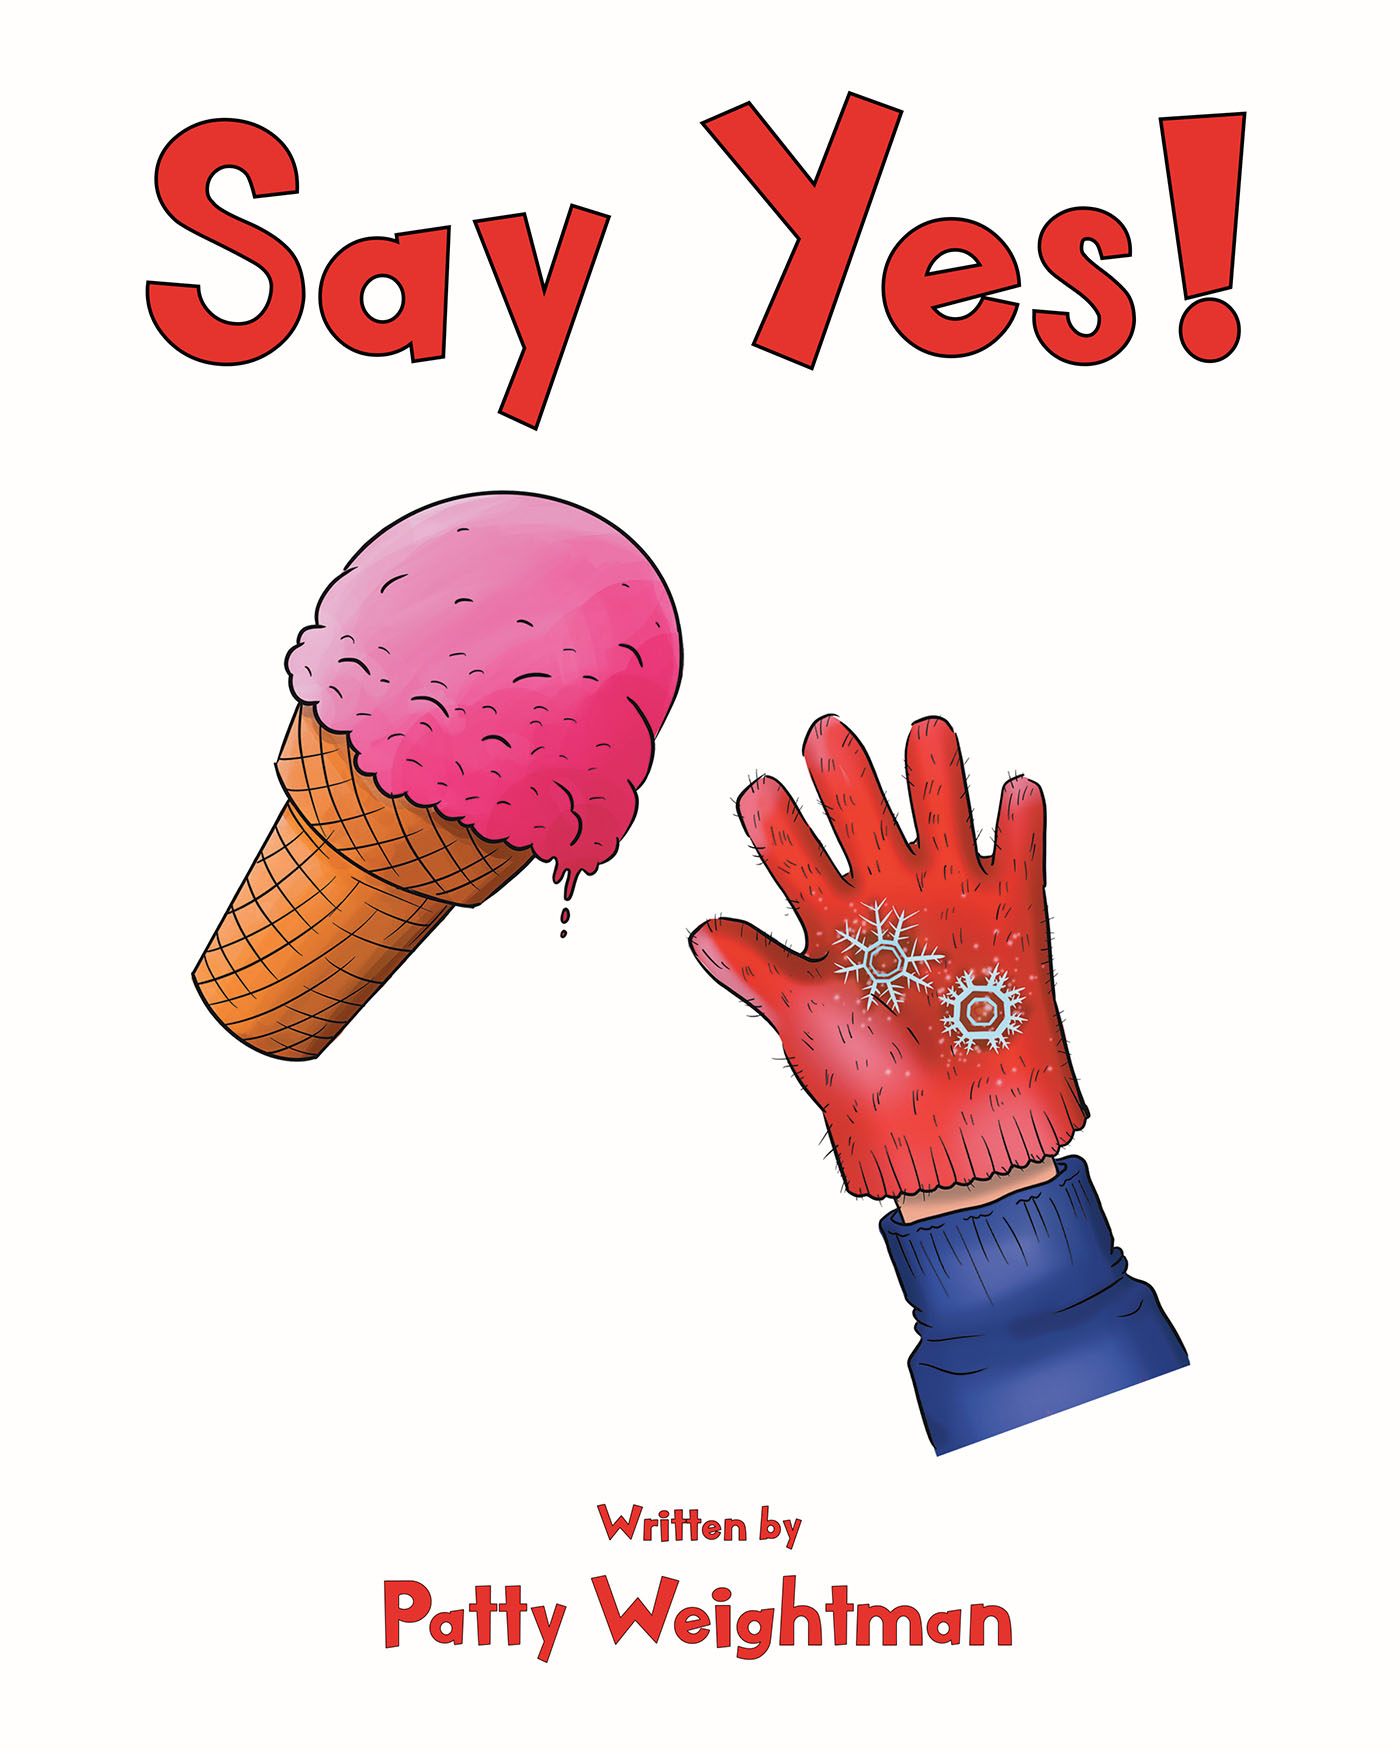 Author Patty Weightman’s New Book, "Say Yes!" is an Adorable and Enthralling Tale to Help Young Readers Develop a Positive Attitude No Matter What There Might be in Life